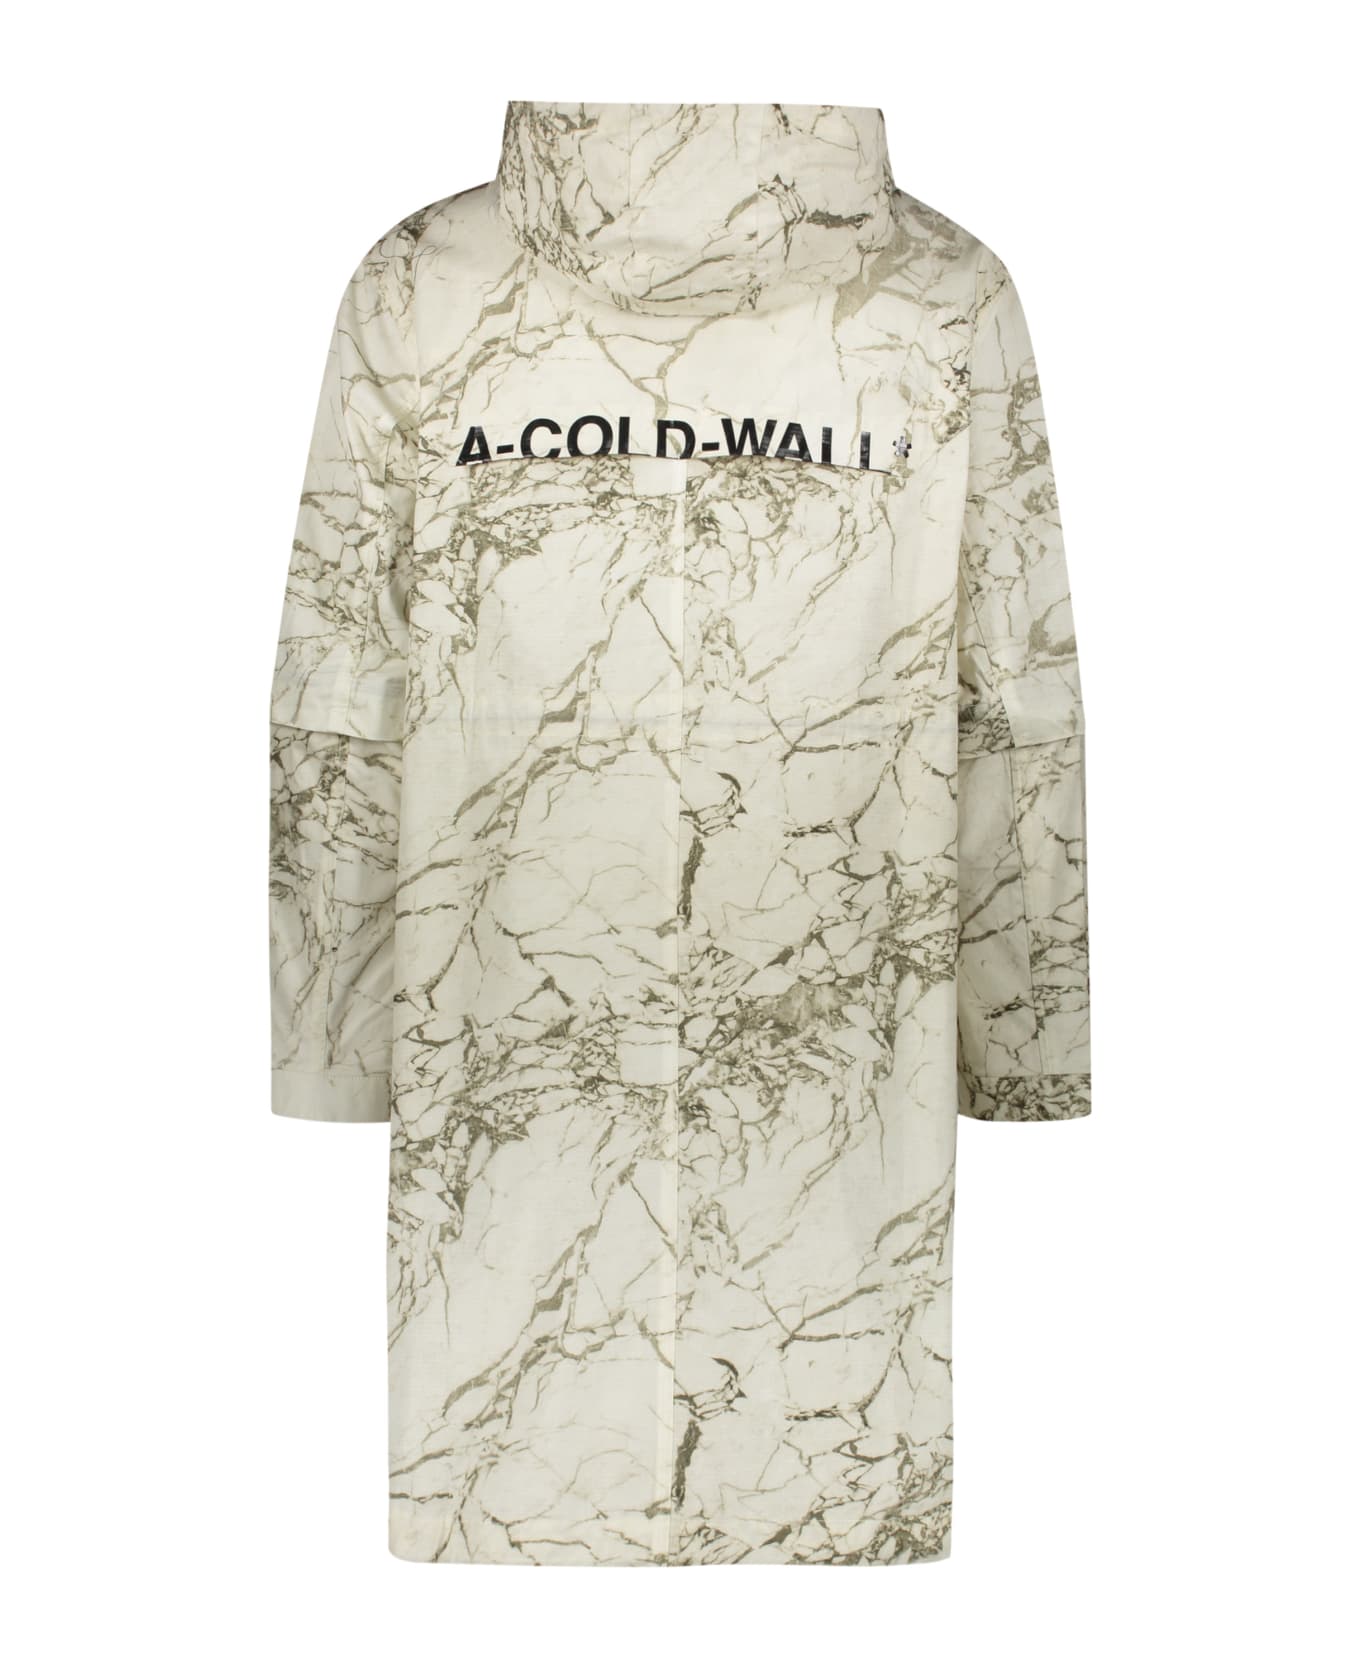 A-COLD-WALL Hooded Cotton Parka - Ivory コート